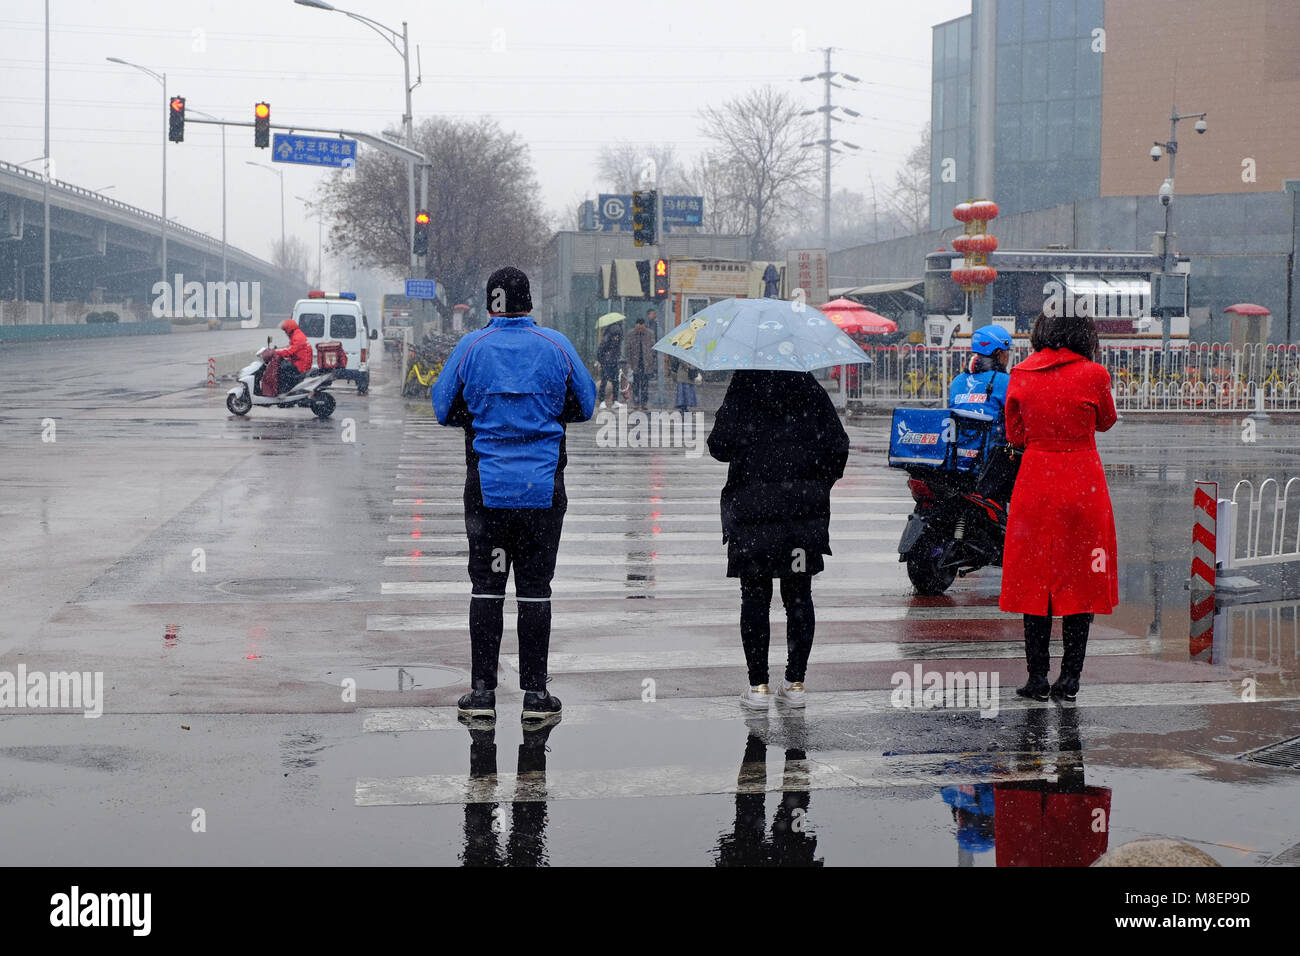 Beijing, China, March 17, 2018. Rare Snowy Day in Chaoyang District, Beijing, China. People crossing a street on a snowy day. Credit: Steven Liveoak/Alamy Live News Stock Photo